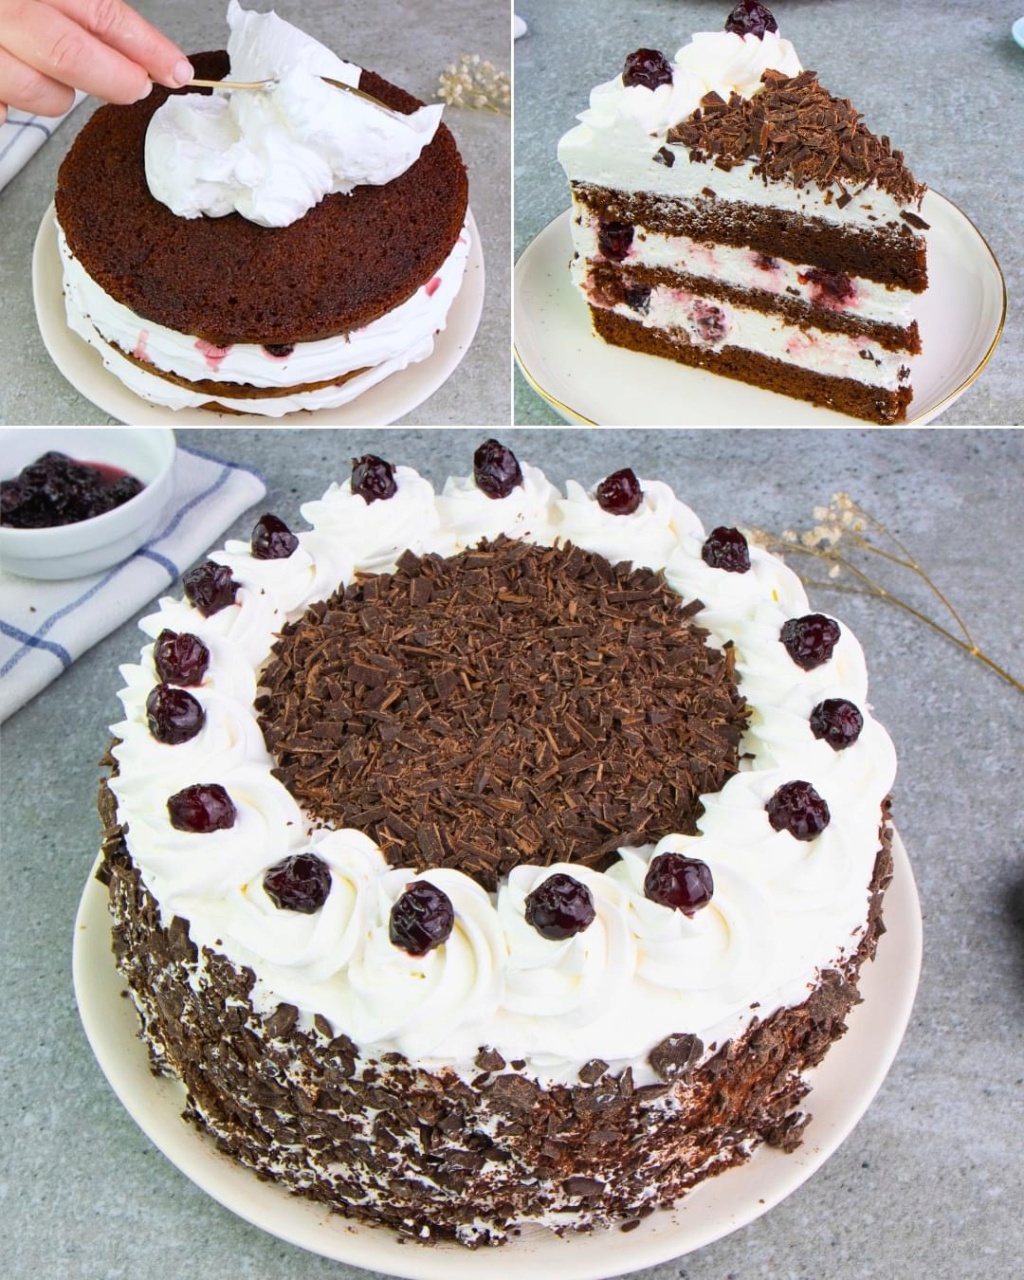 Les desserts gourmands  - Page 35 Img11088